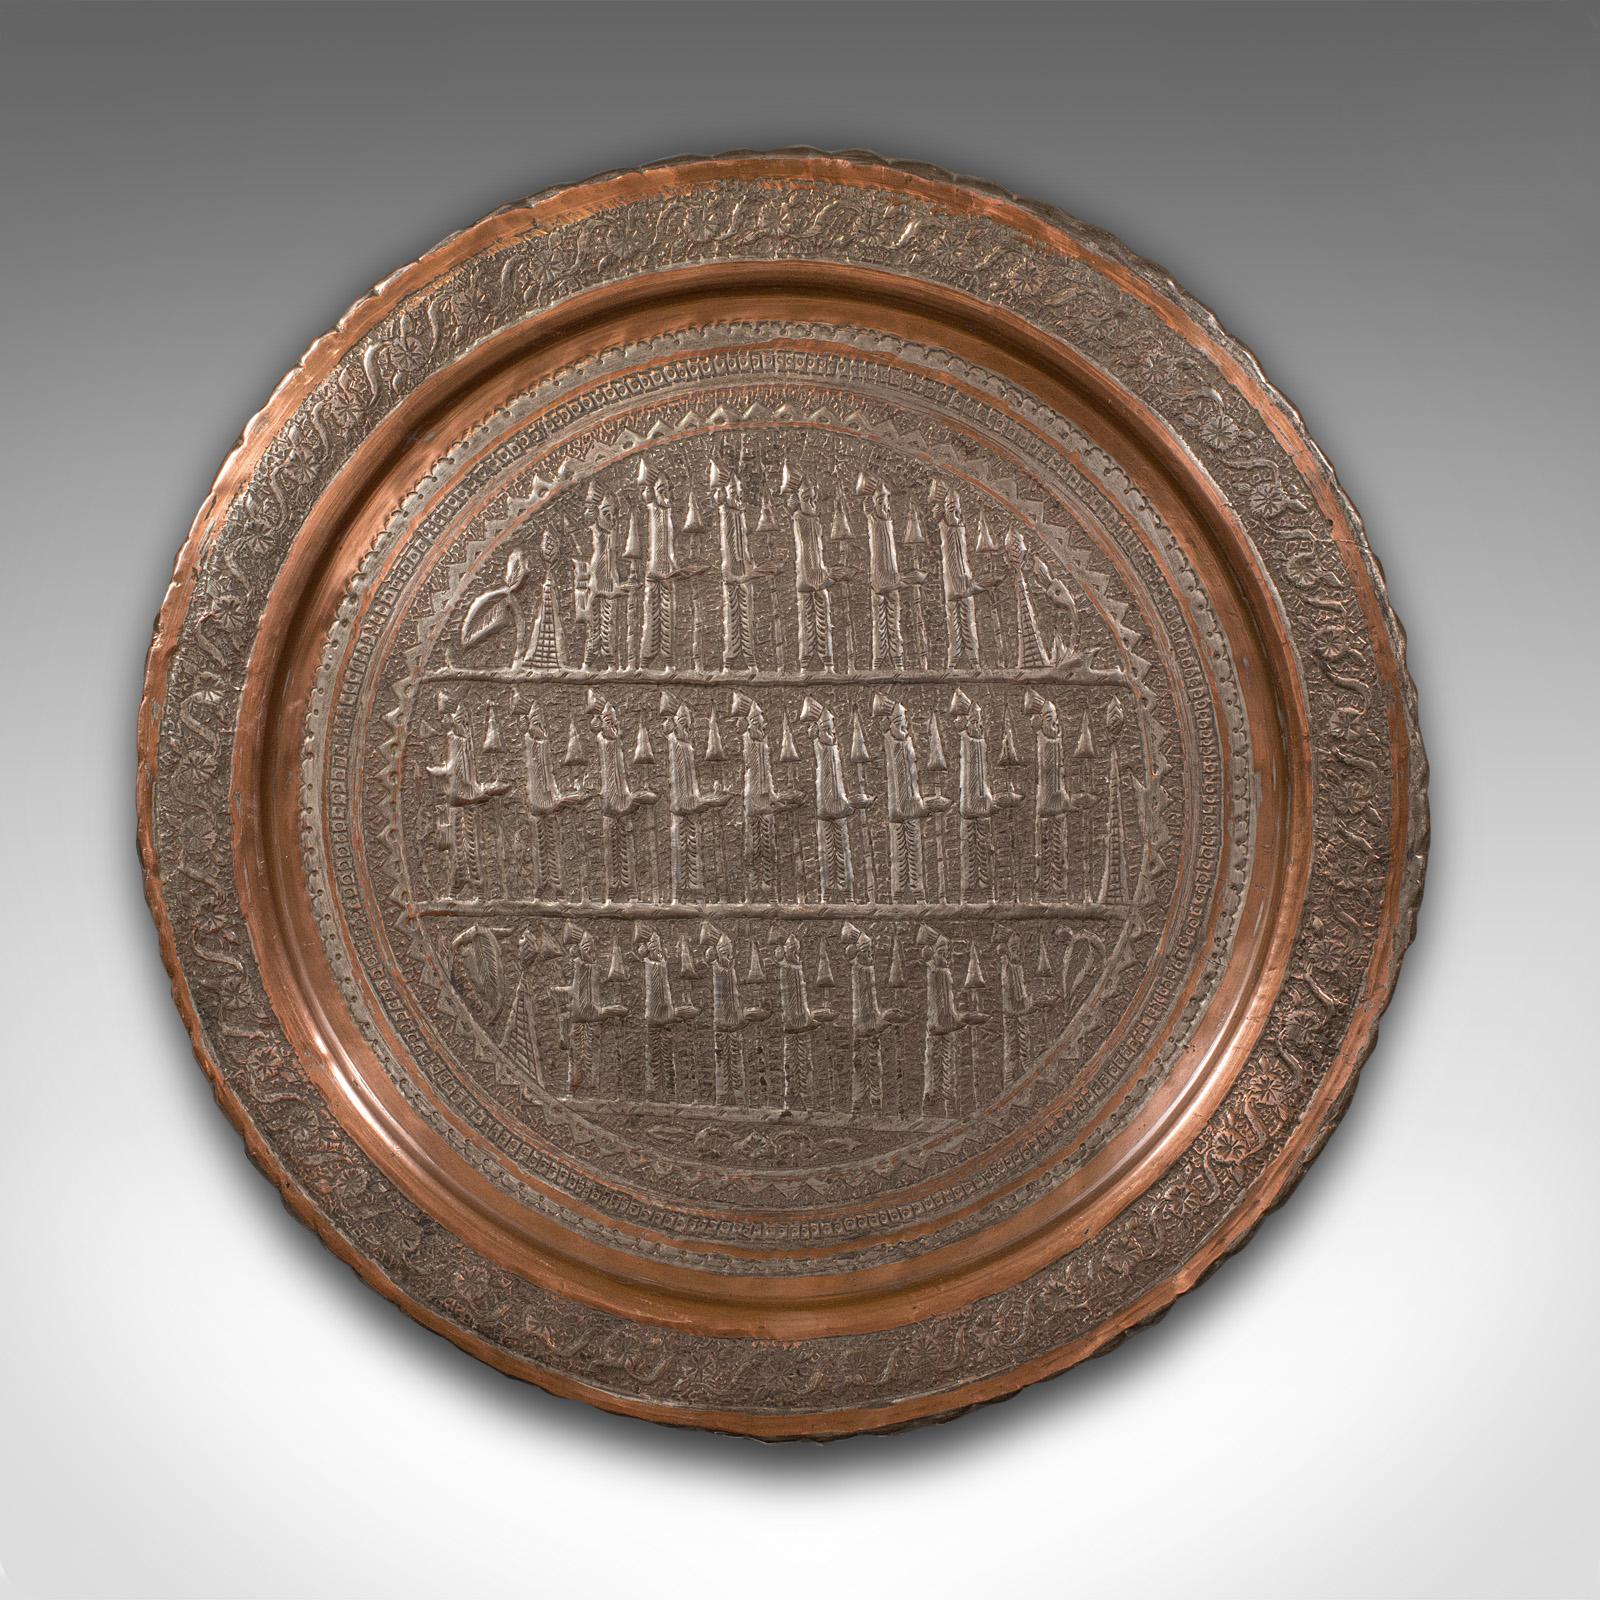 This is an antique decorative charger. A Turkish, copper repousse wall plate, dating to the early Victorian period, circa 1850.

Superb Ottoman period plate with fascinating detail
Displays a desirable aged patina and in good original order
Silvered